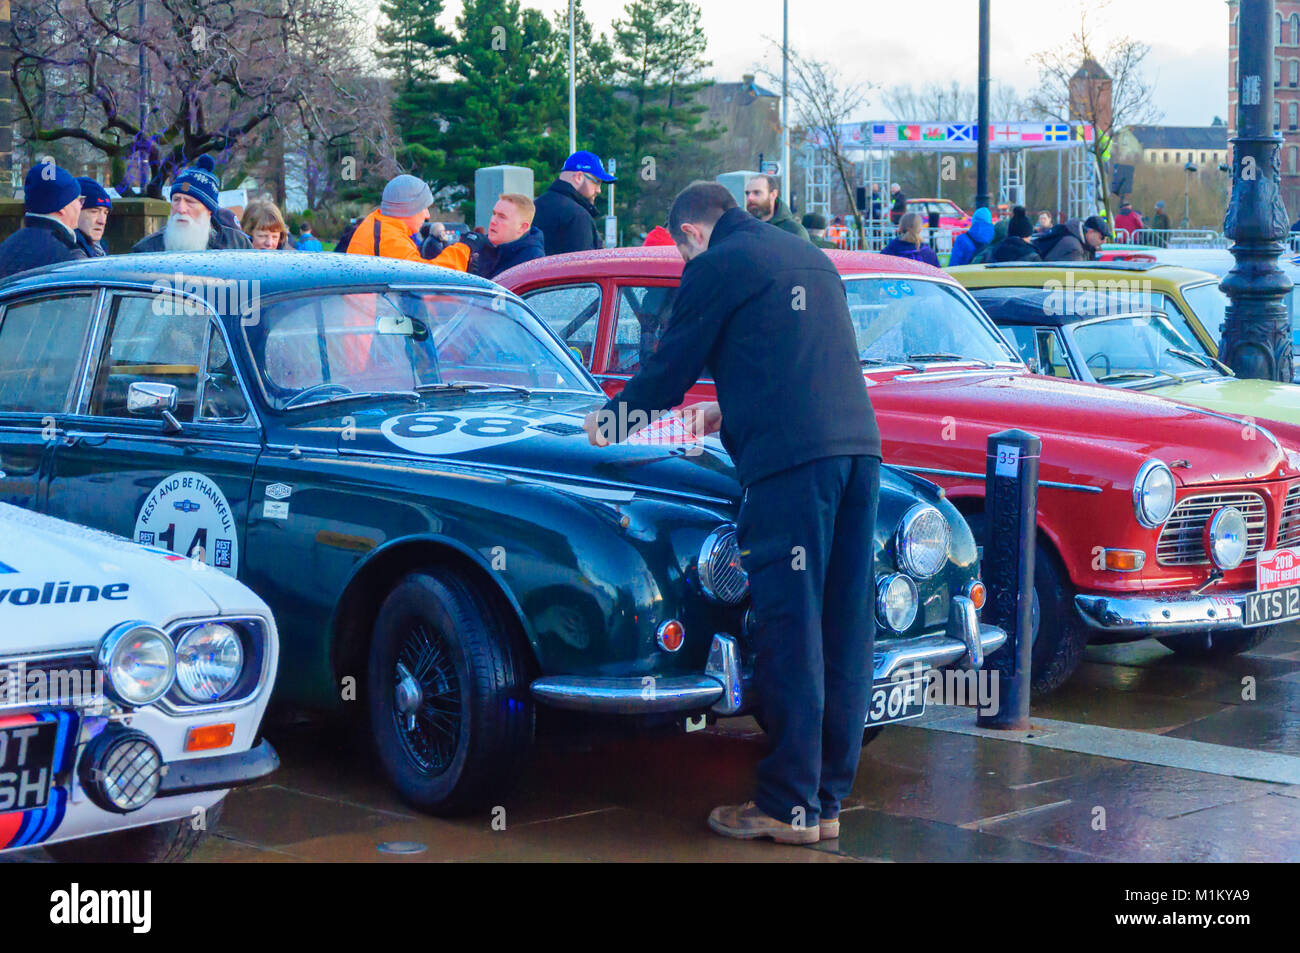 Paisley, Scotland, UK. 31st January 2018: Sticker placed on dark green Jaguar car. The Monte Carlo Rally starts at Paisley Abbey. This year sees the 21st  Historique event and the 3rd Classique event. Both events are staged by the Automobile Club de Monaco  and take place on open public roads. The distance to Monte Carlo is 1270 miles. Credit: Skully/Alamy Live News Stock Photo